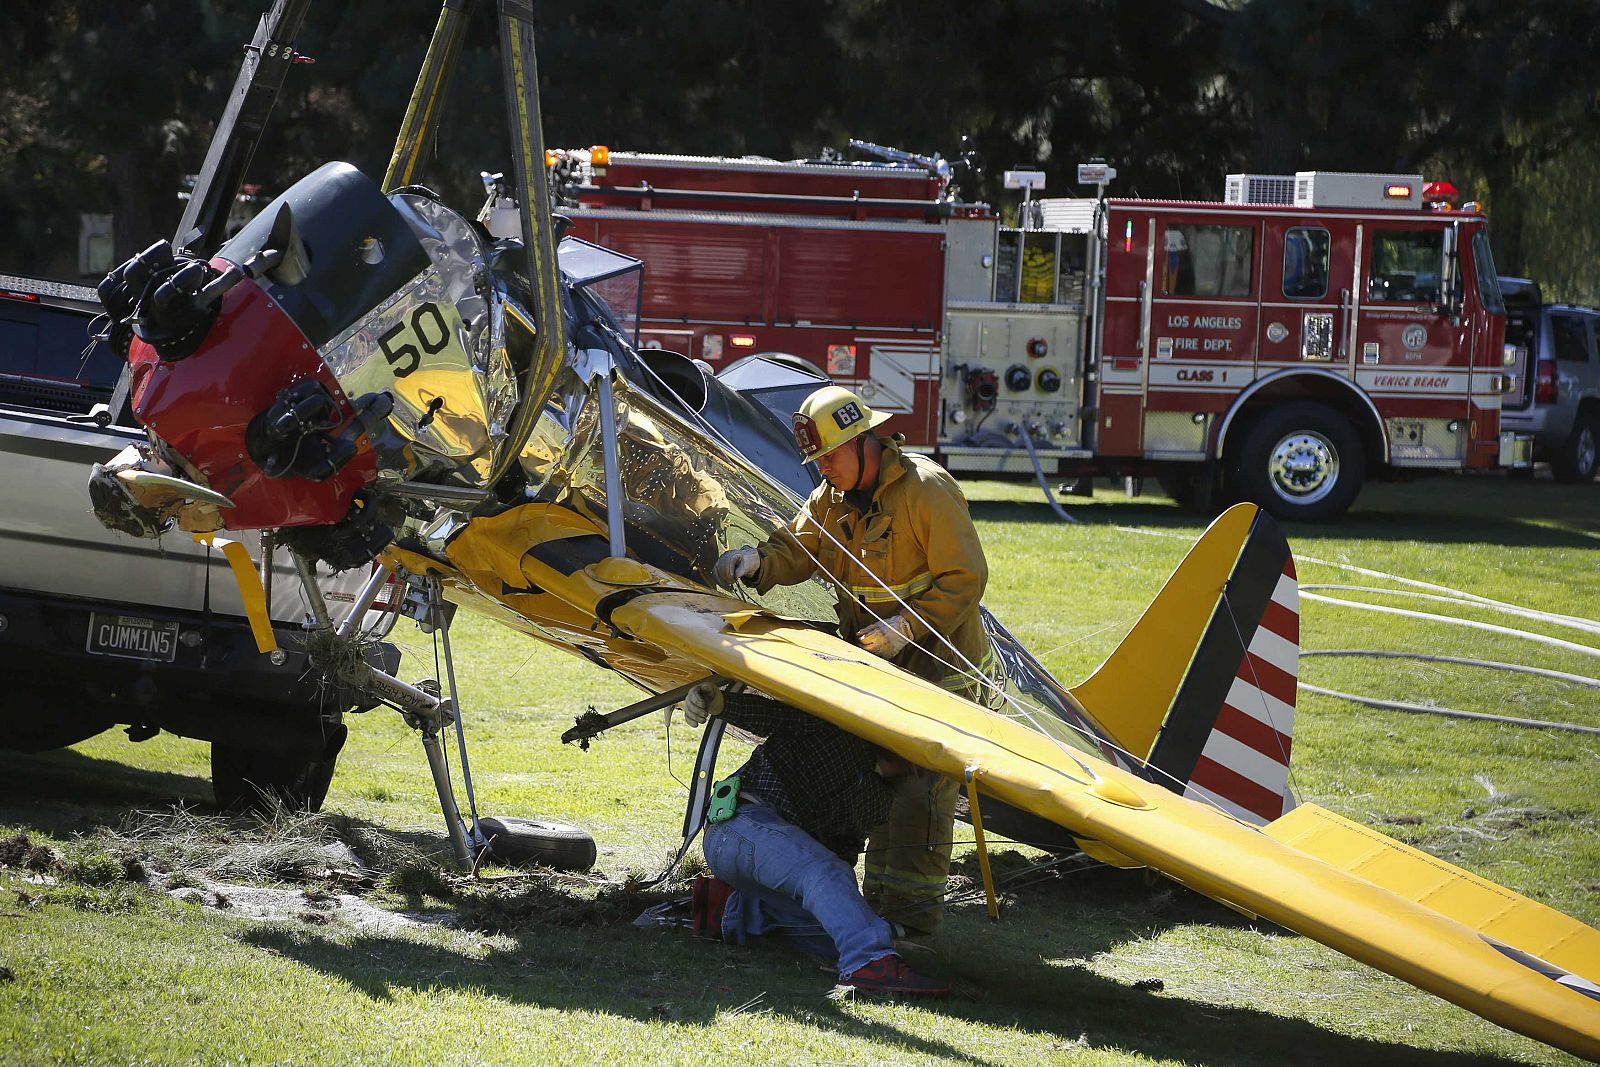 Actor Harrison Ford's damaged airplane is taken away after its crash landing at Penmar Golf Course in Venice, Los Angeles